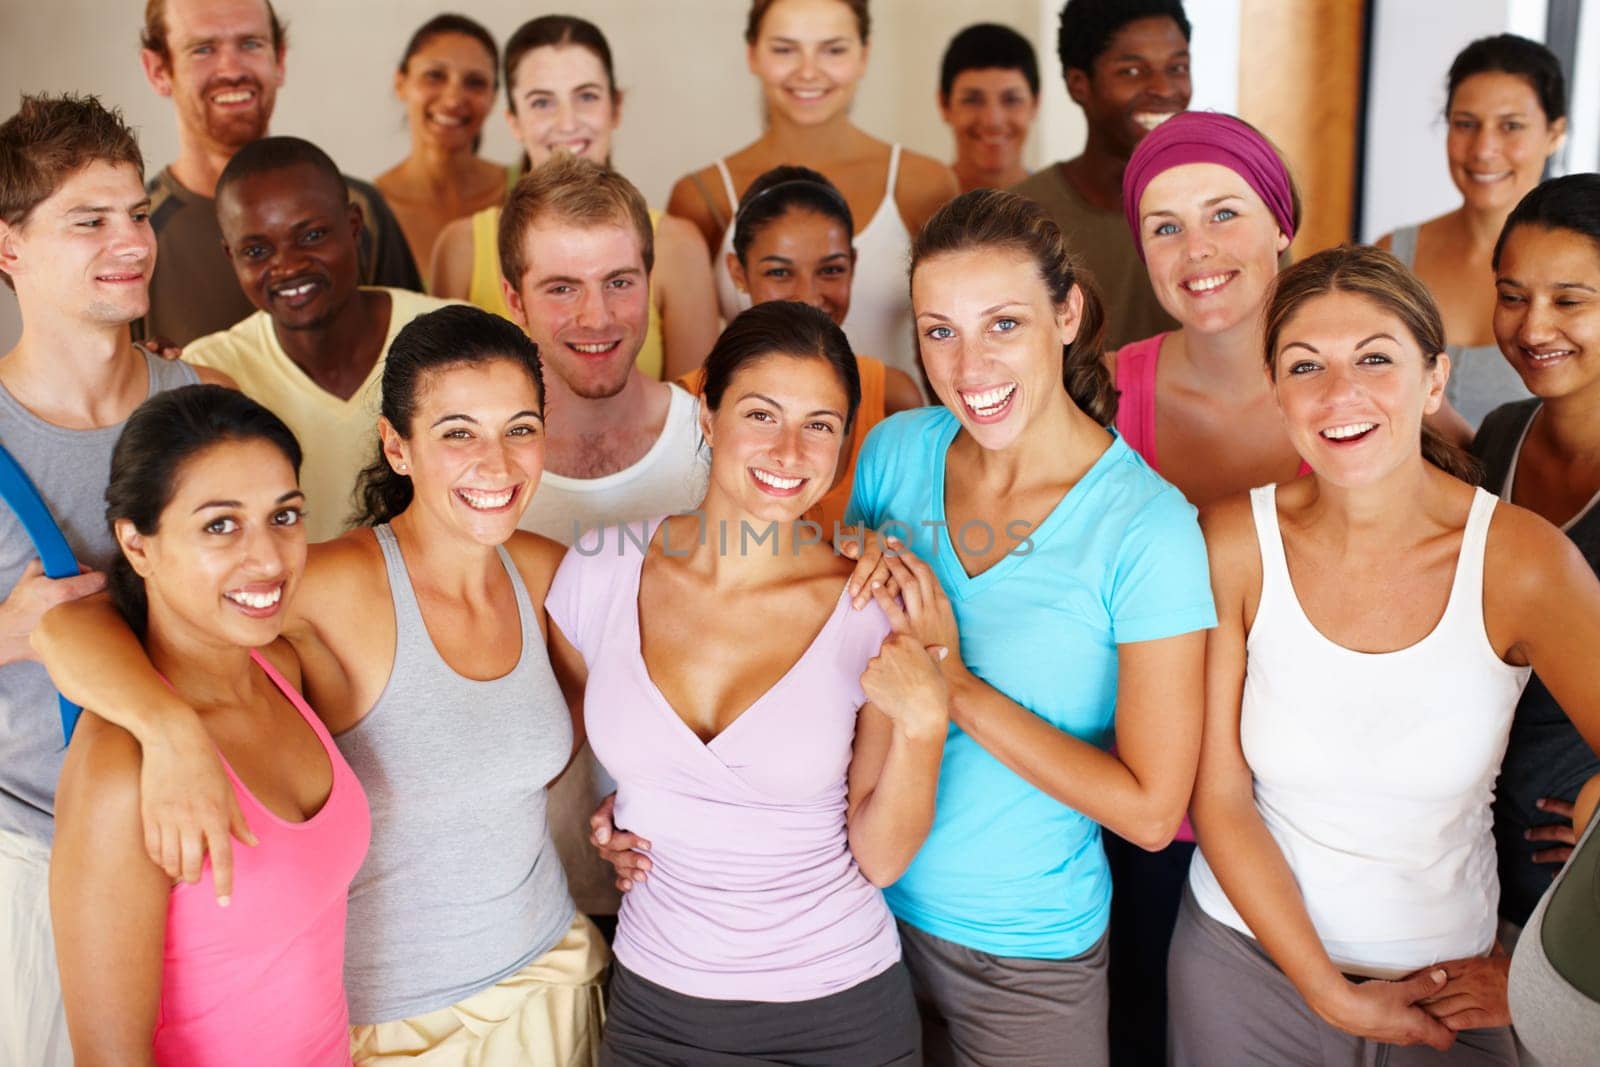 Smiling in the yoga class. Portrait of a a group of yoga enthusiasts standing in a yoga studio